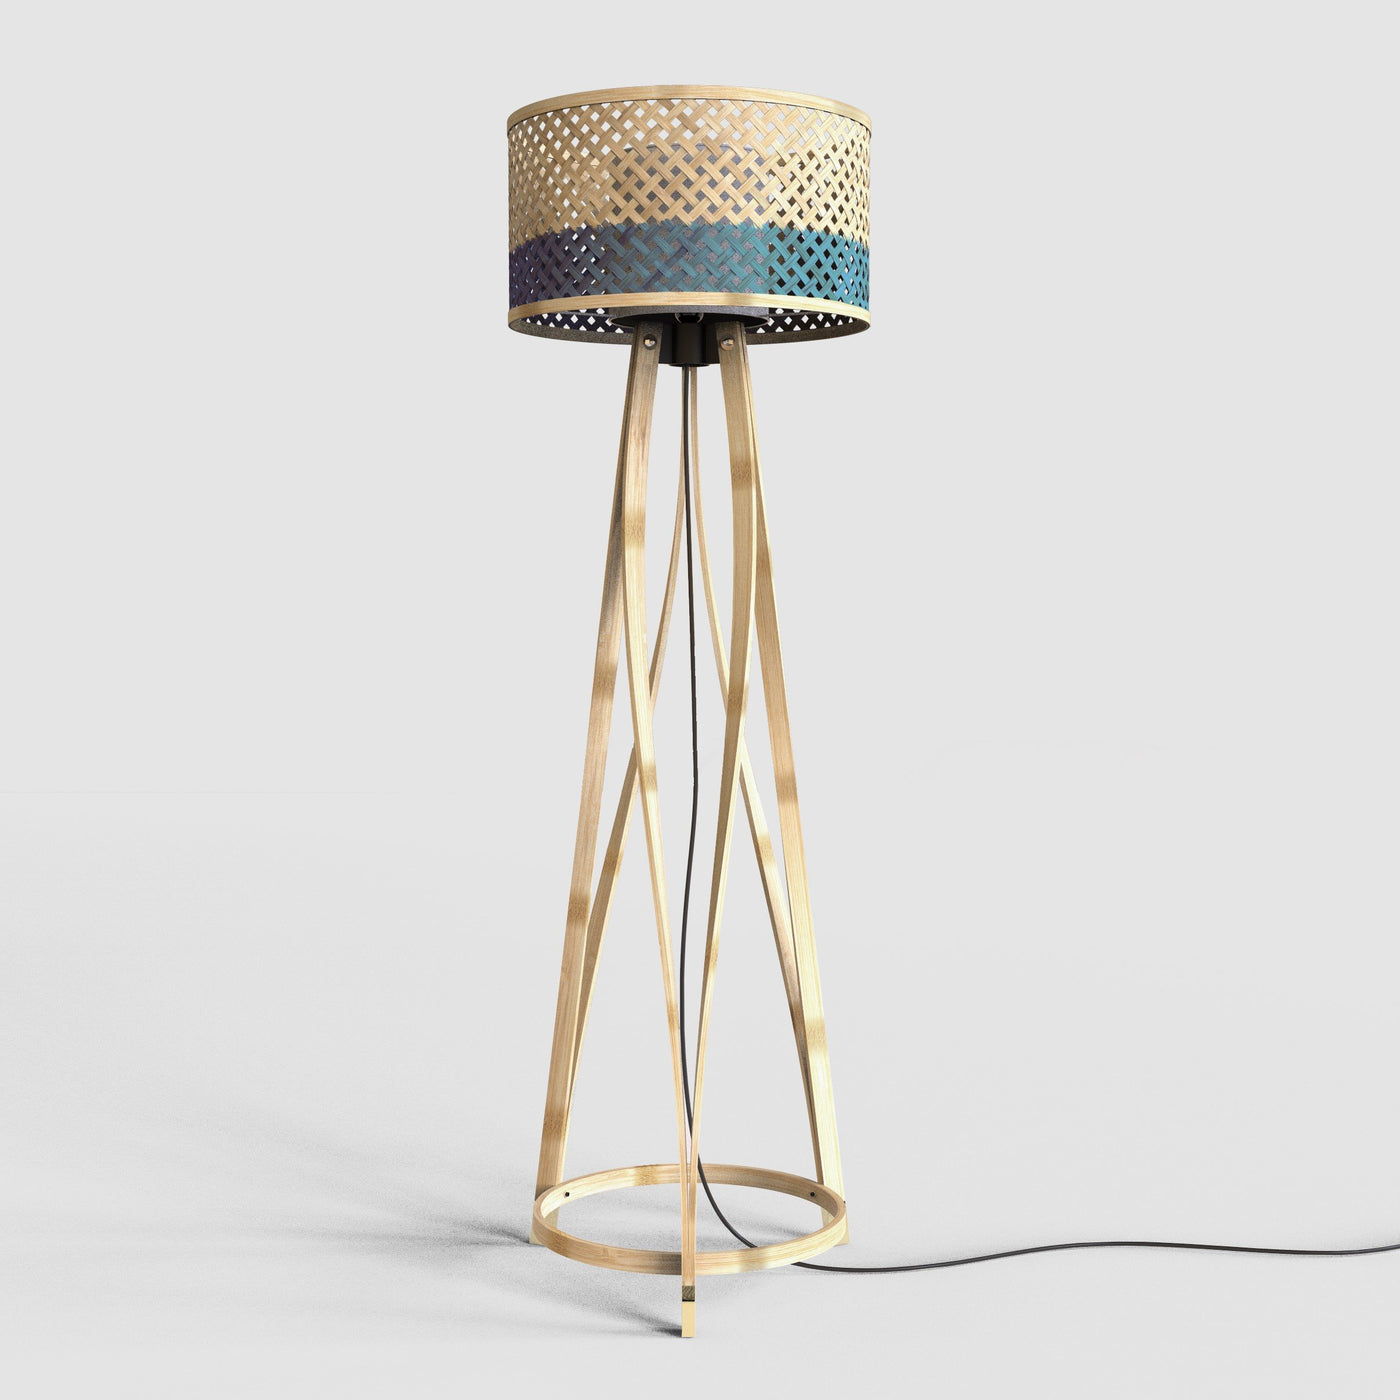 Saanvi Bamboo Floor Lamp-Lighting-BAMBOO, BAMBOO LIGHTS, FLOOR LAMPS-Forest Homes-Nature inspired decor-Nature decor